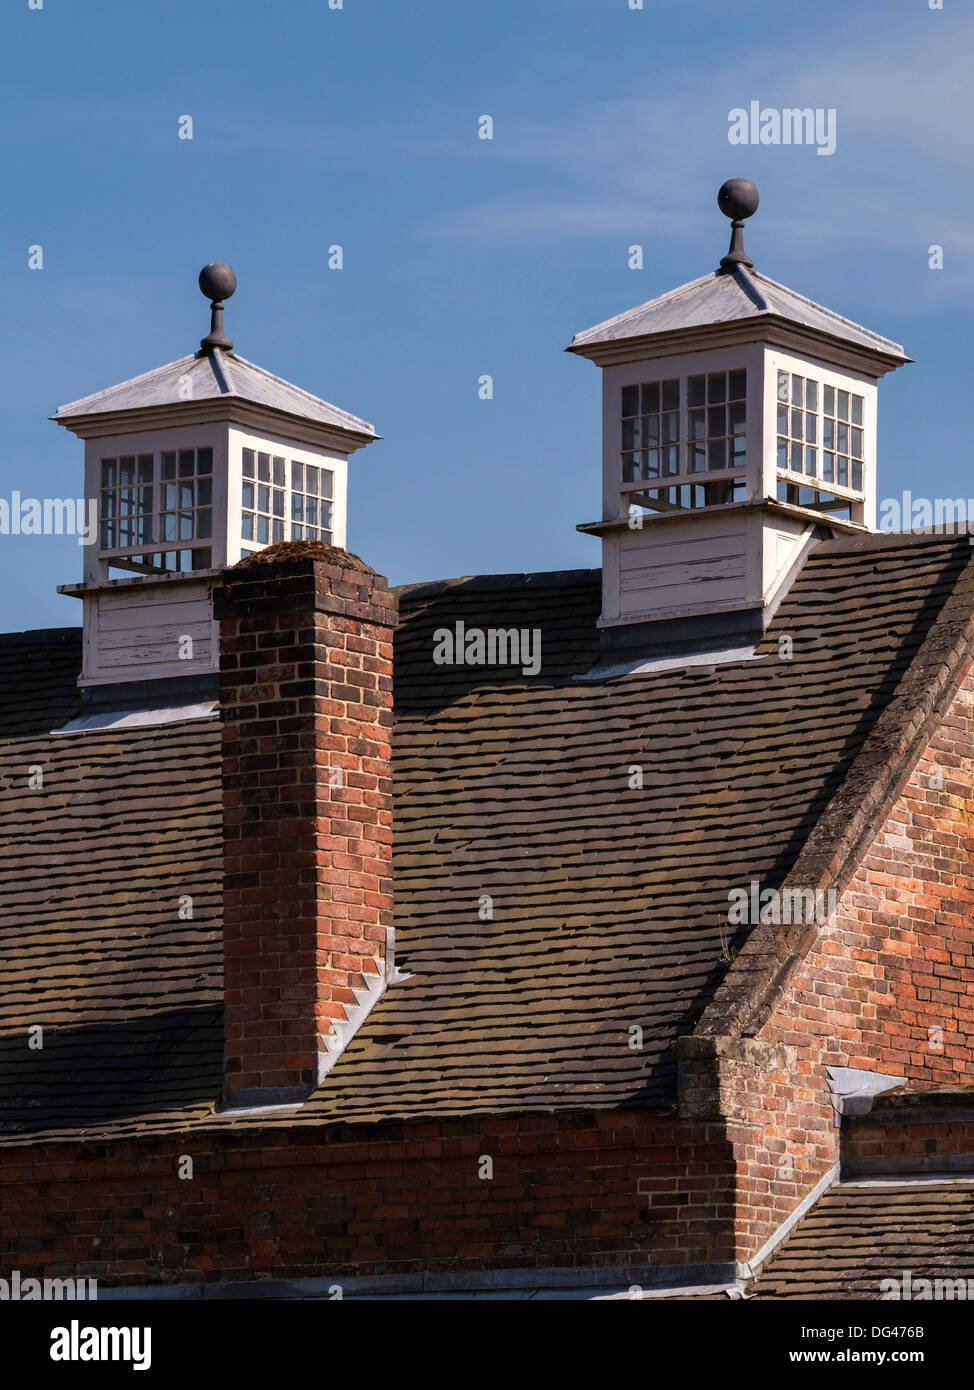 Two old rectangular ornate glazed Dovecotes above red tiled pitched roof, Calke Abbey, Ticknall, Derbyshire, England, UK Stock Photo